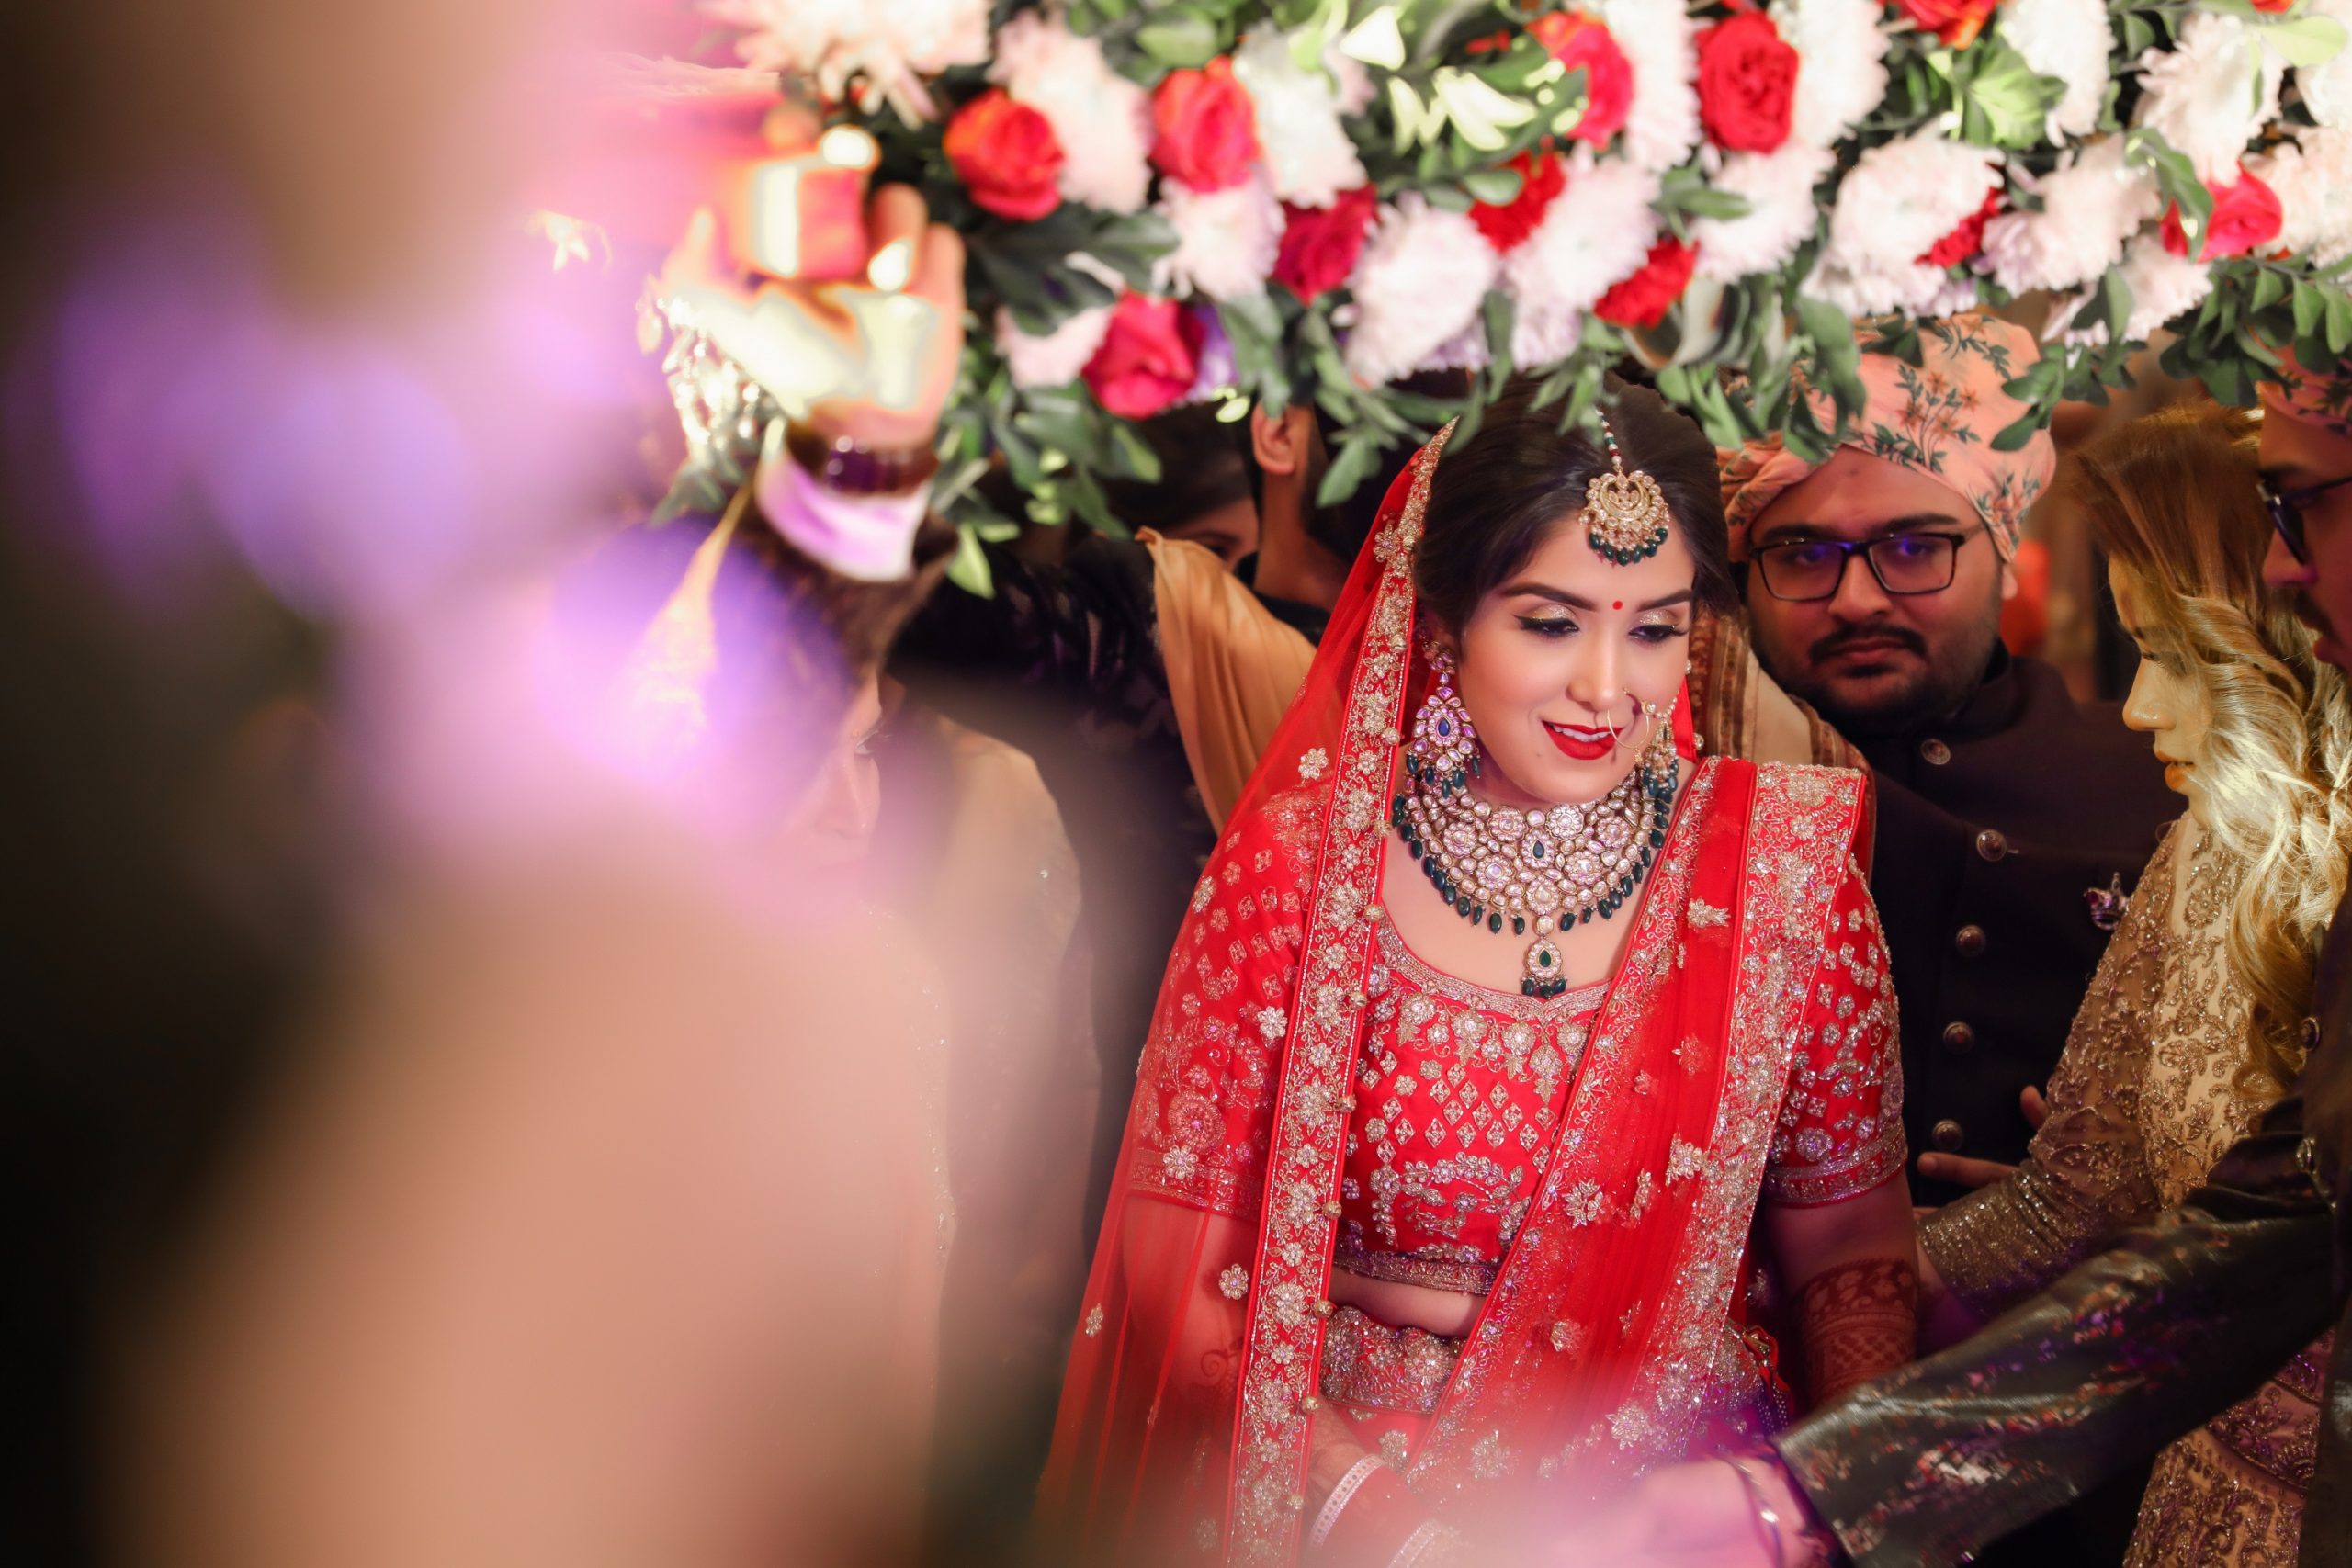 Top Photographers in Chandigarh for your wedding is right here!